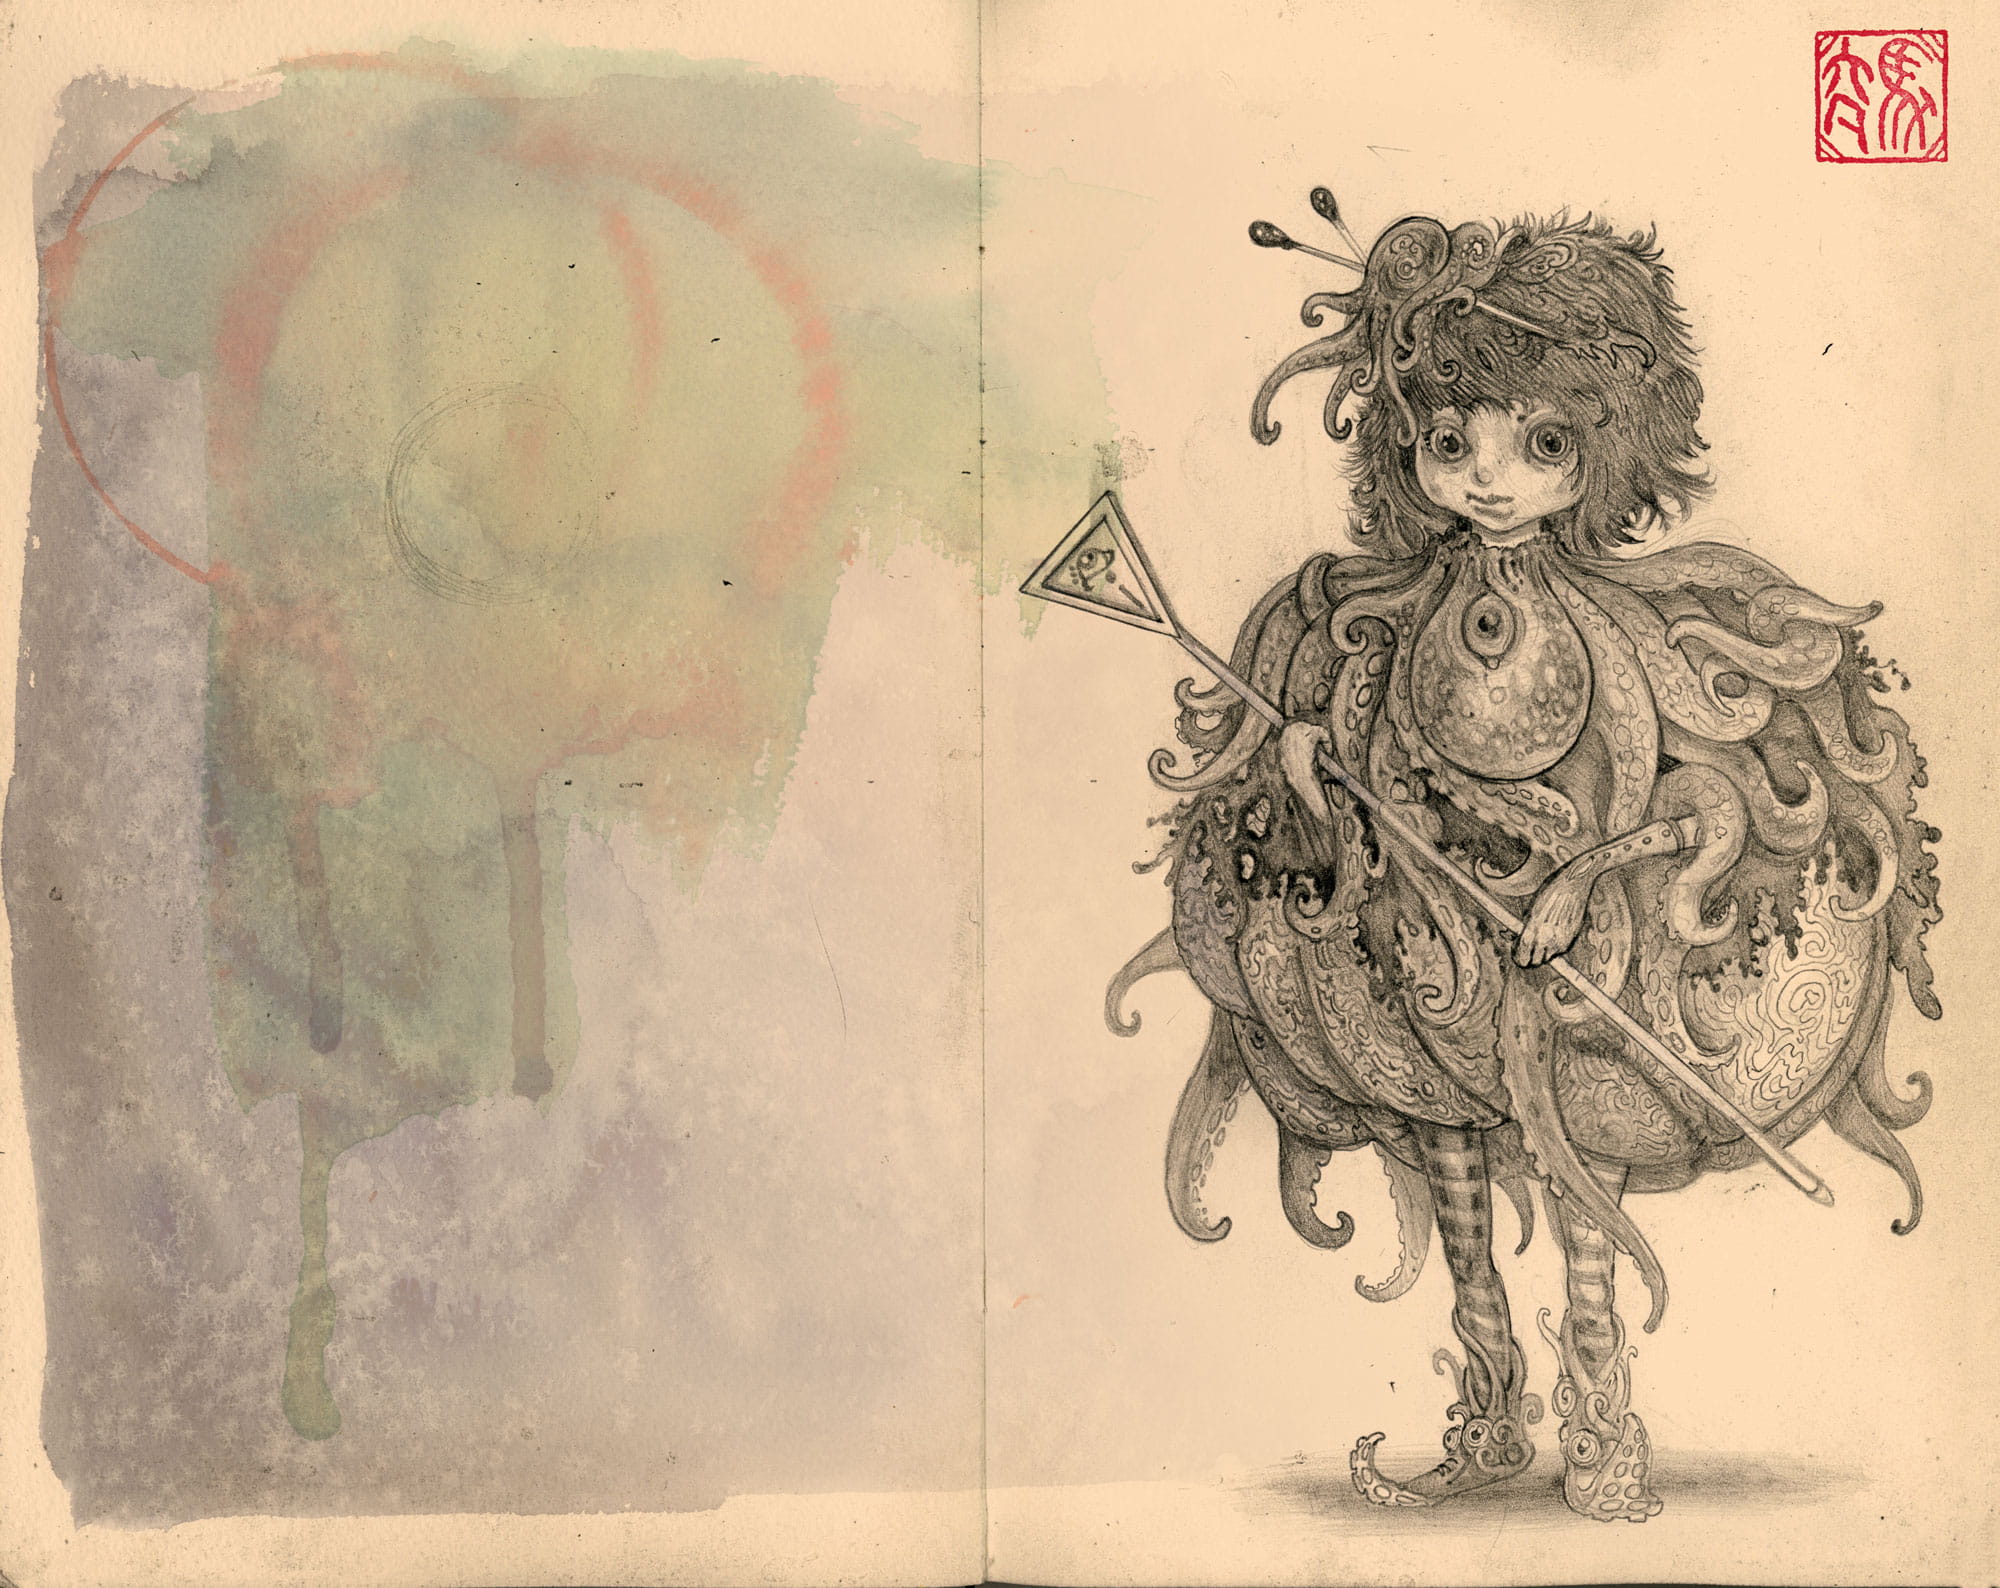 Uncolored sketch of Titania on the right-side page of a Moleskine notebook spread open.